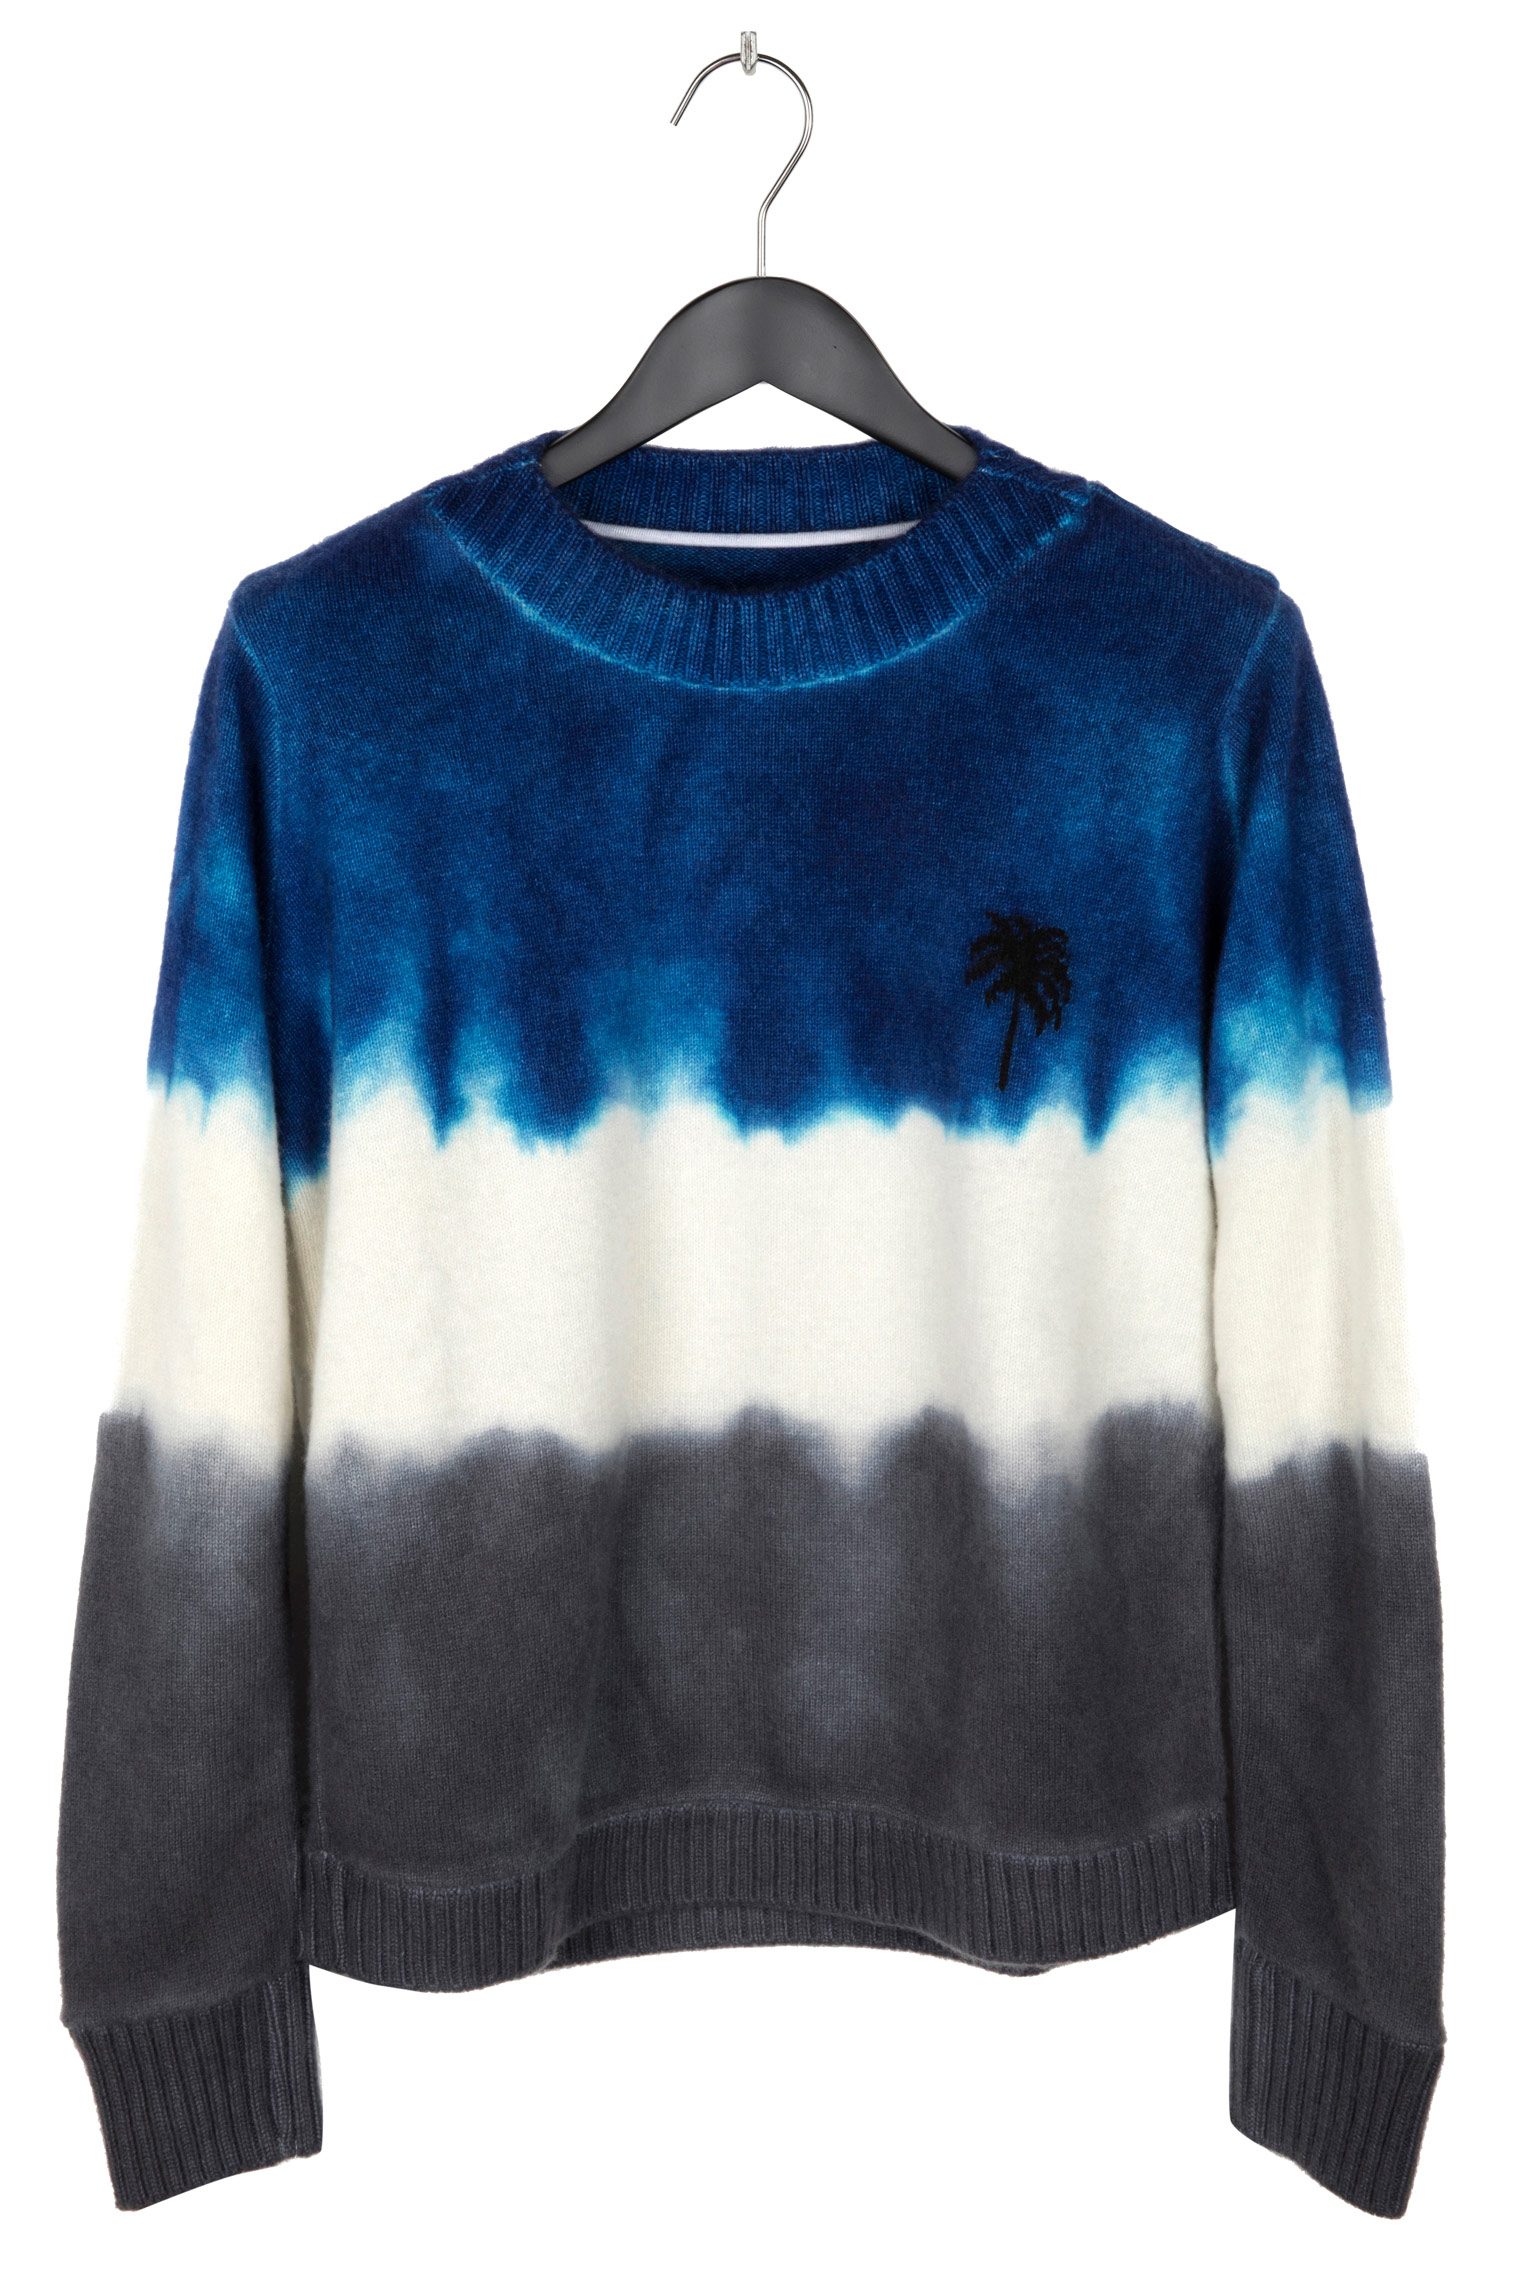 THE ELDER STATESMAN Intarsia Dyed Palm Tree Sweater – endstation gallery.